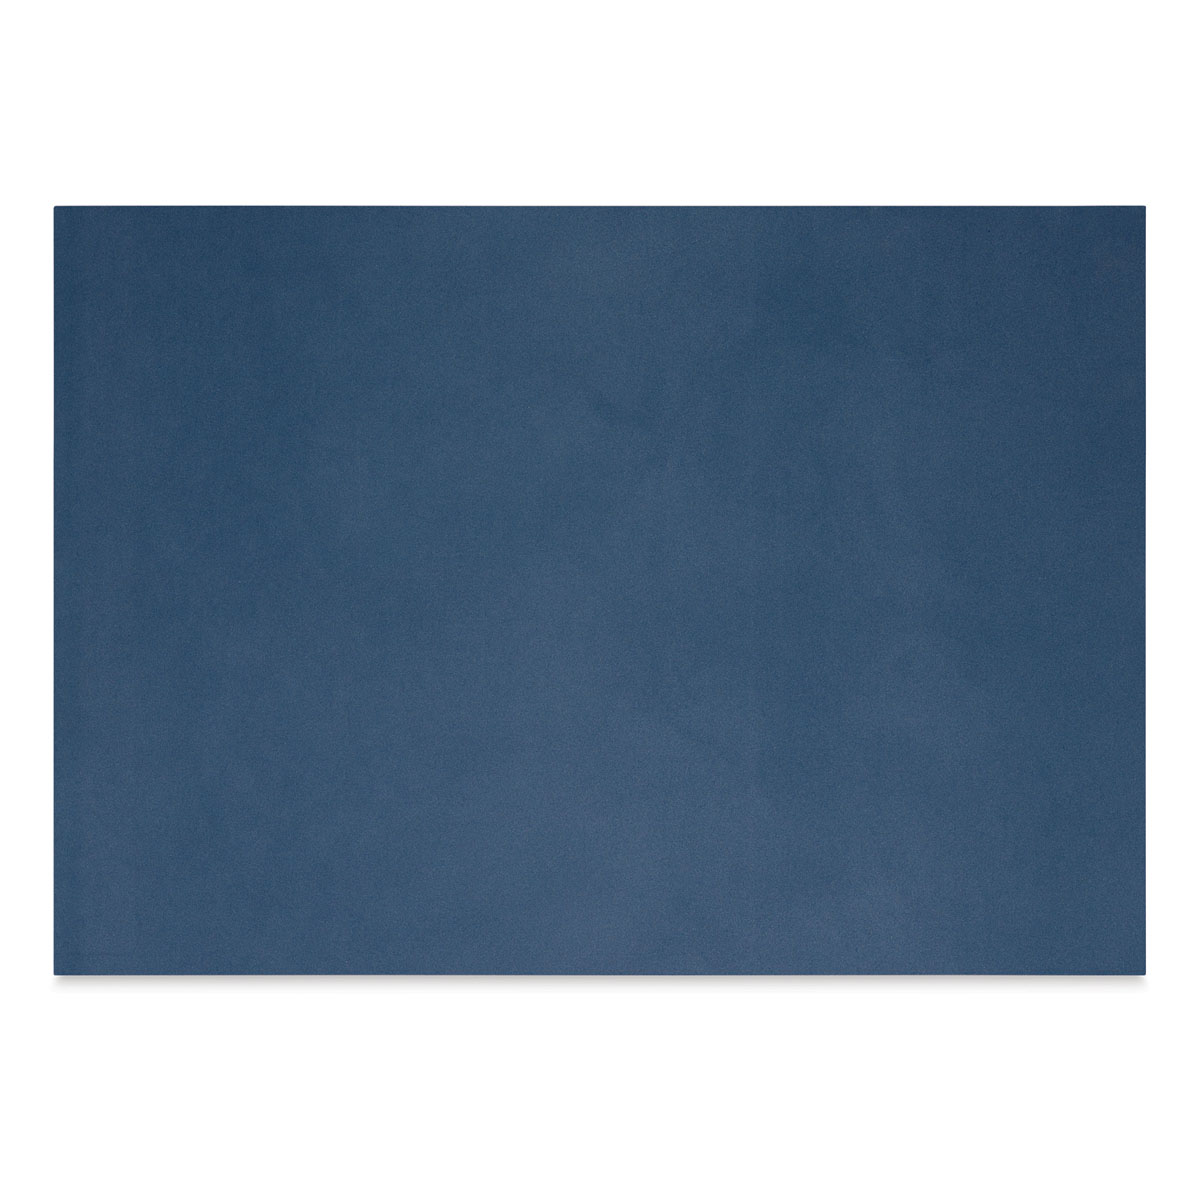 Clairefontaine Pastelmat Mounted Board - Light Blue 19.5 x 27.5 in